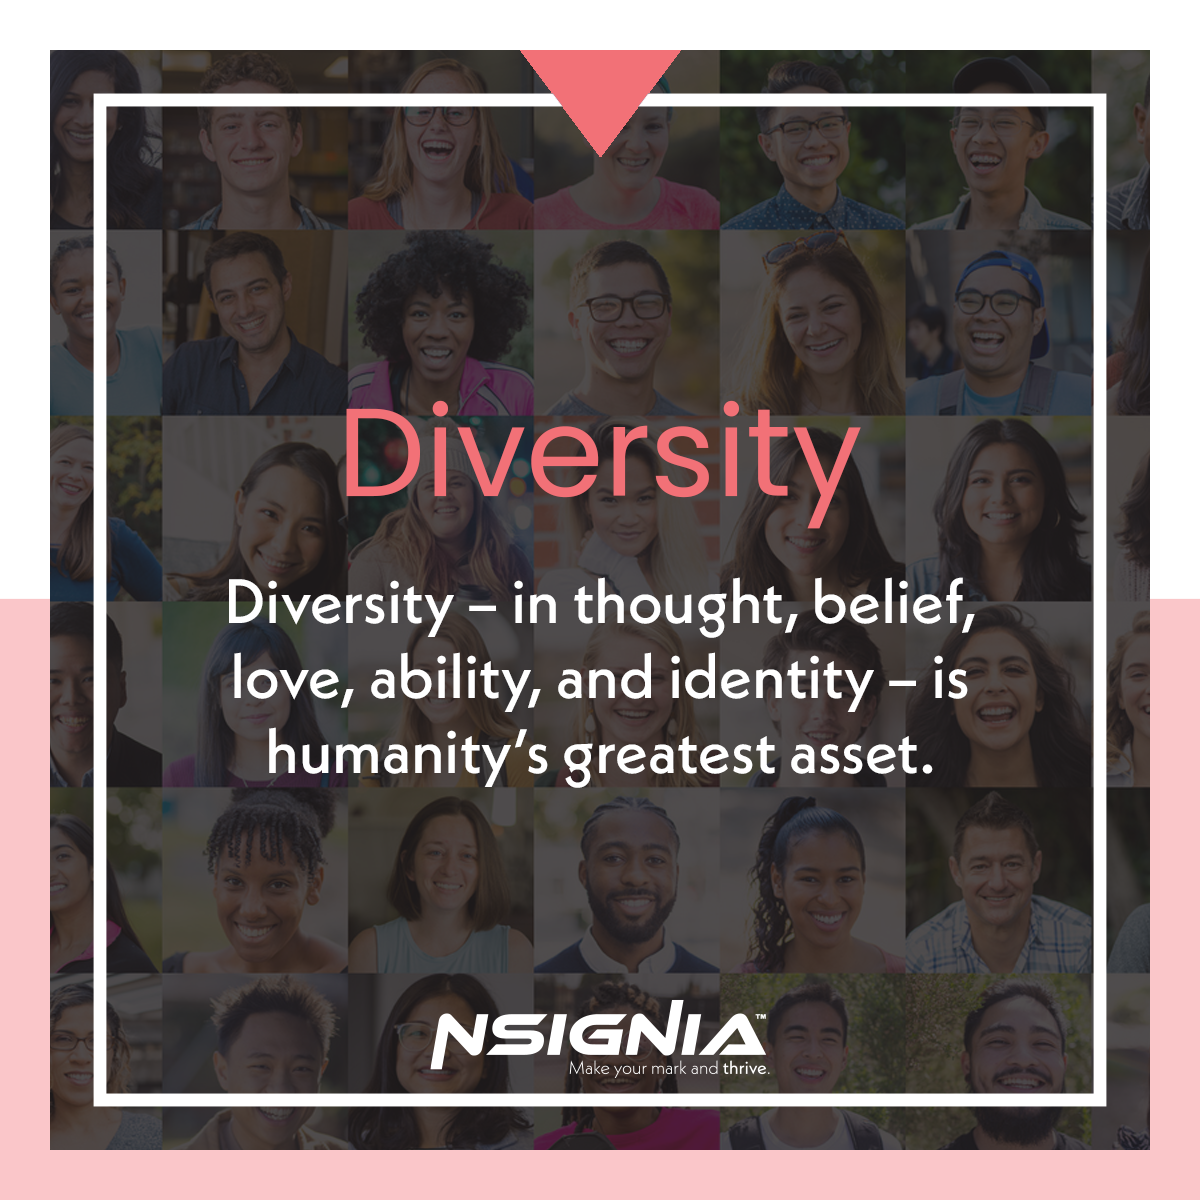 Diversity - Diversity – in thought, belief, love, ability, and identity – is humanity’s greatest asset.